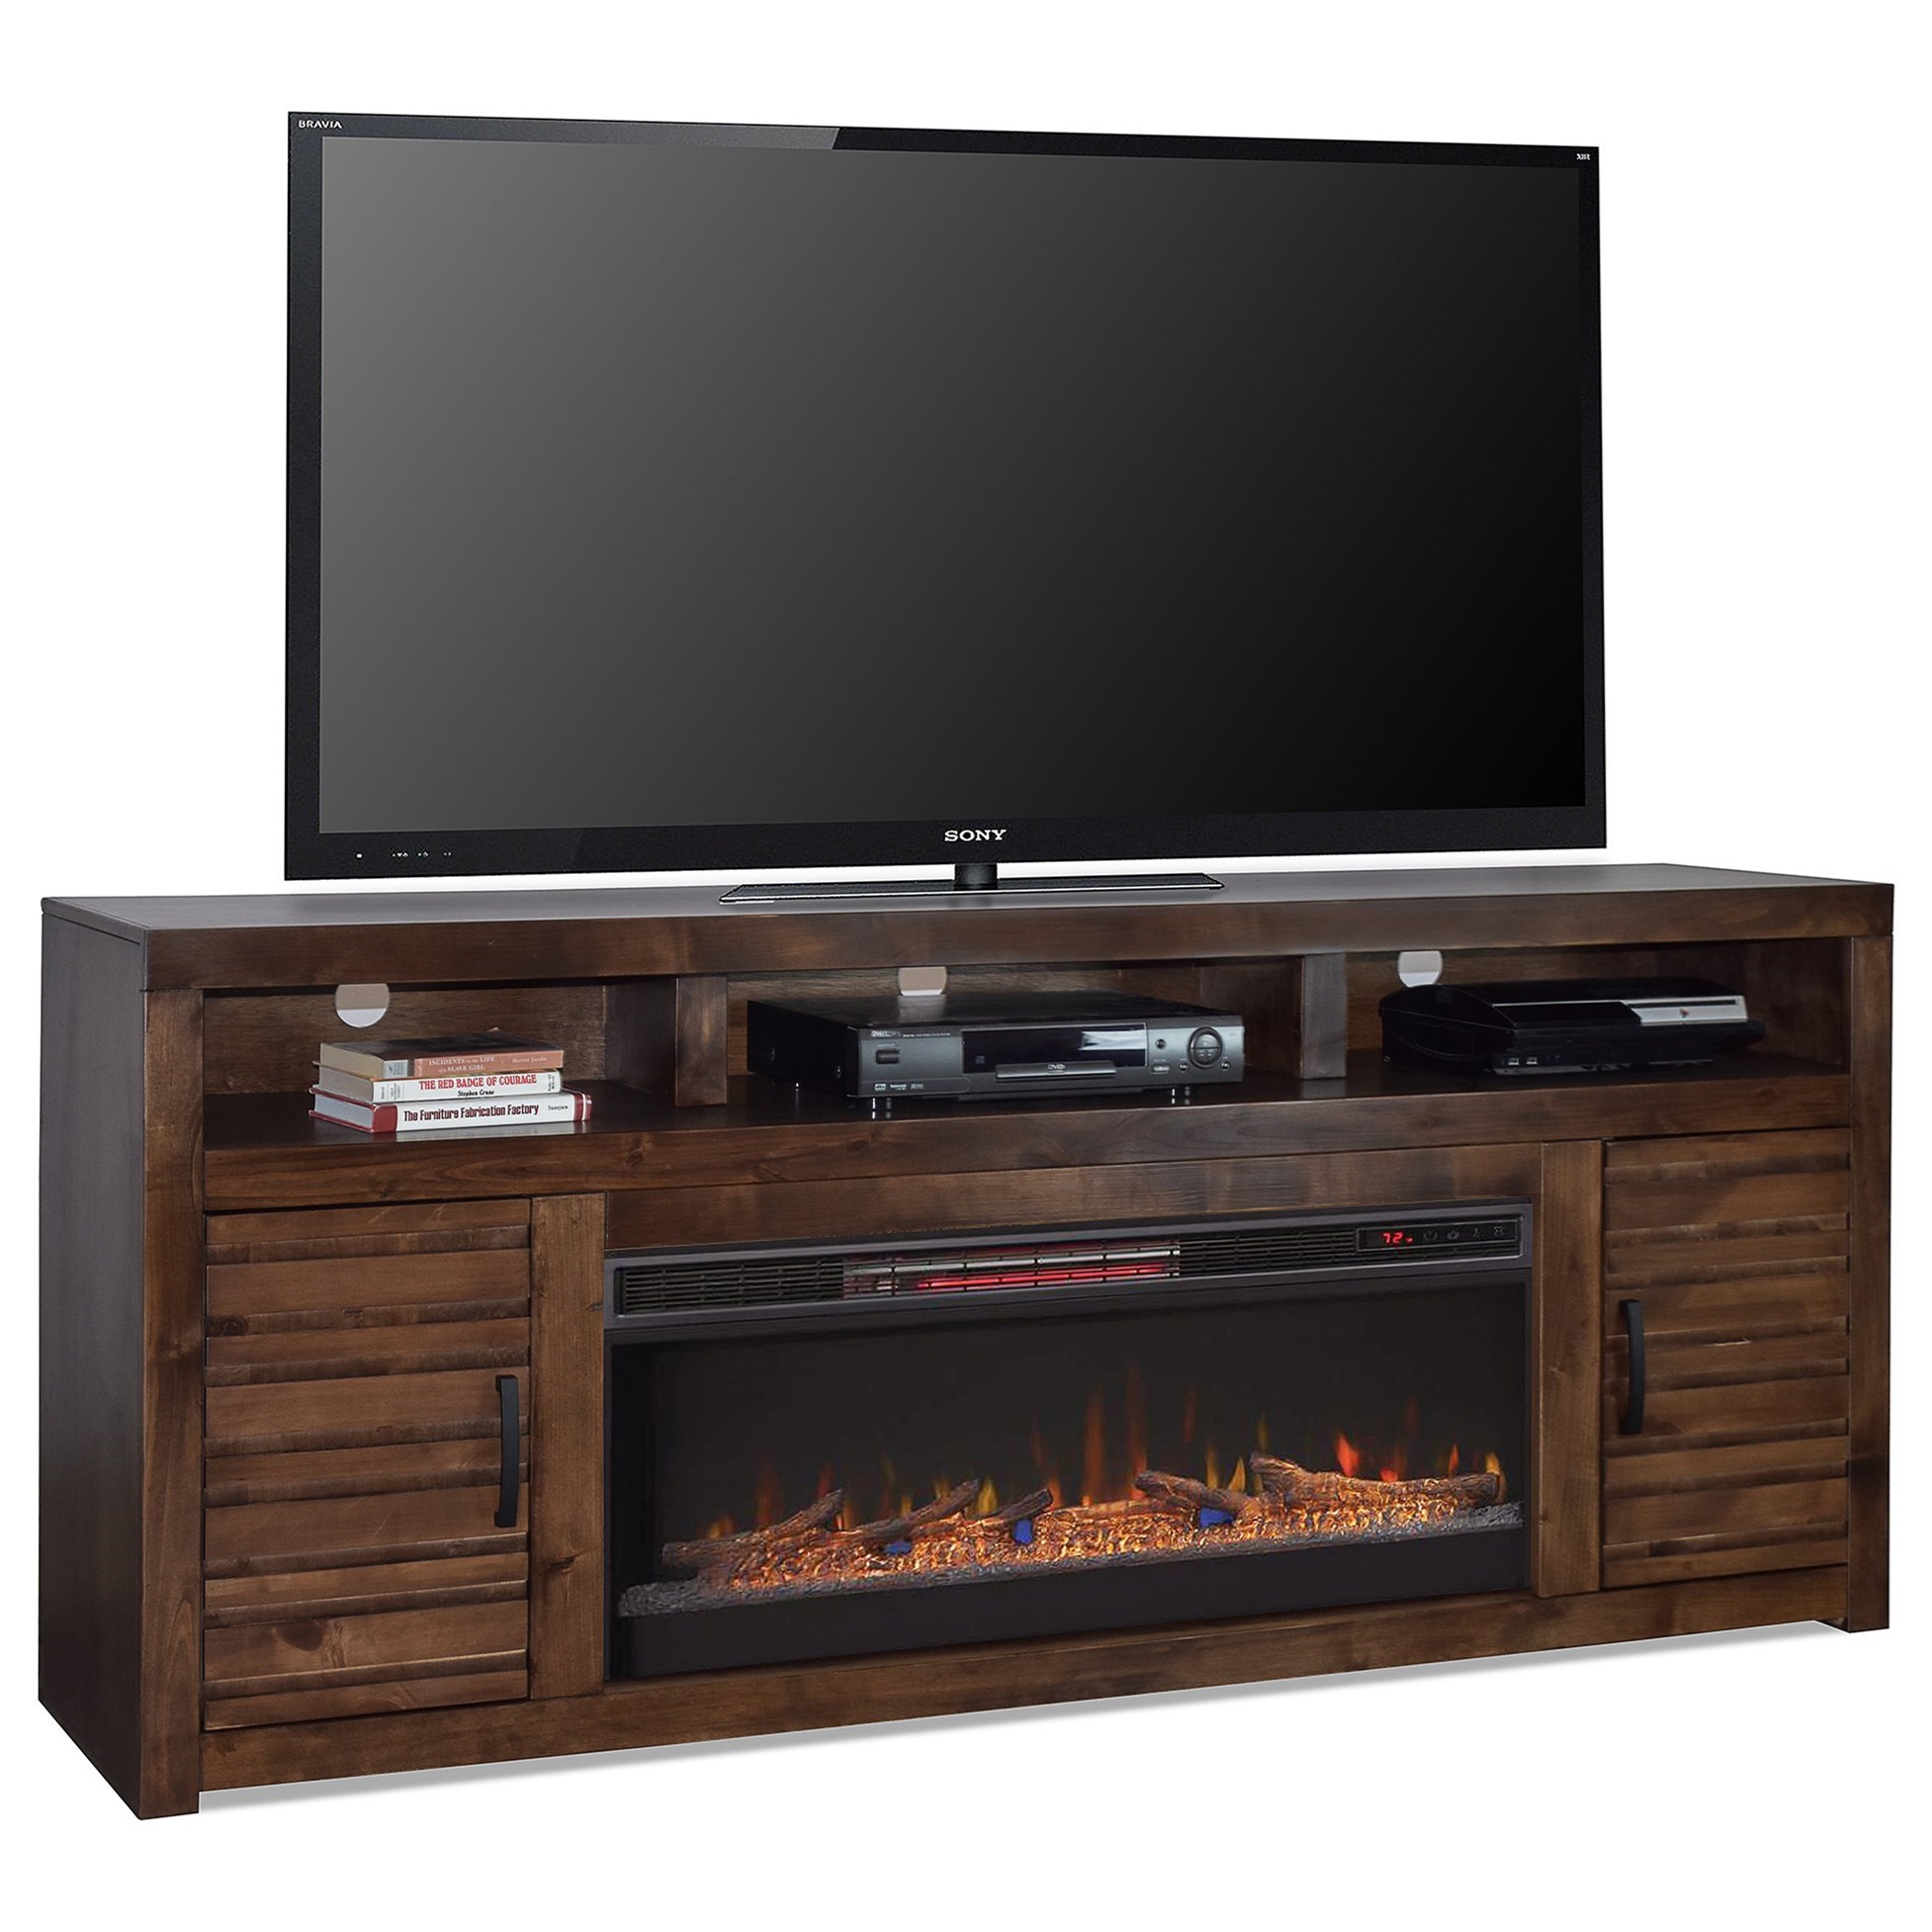 78" TV Console with Storage and Fireplace Insert